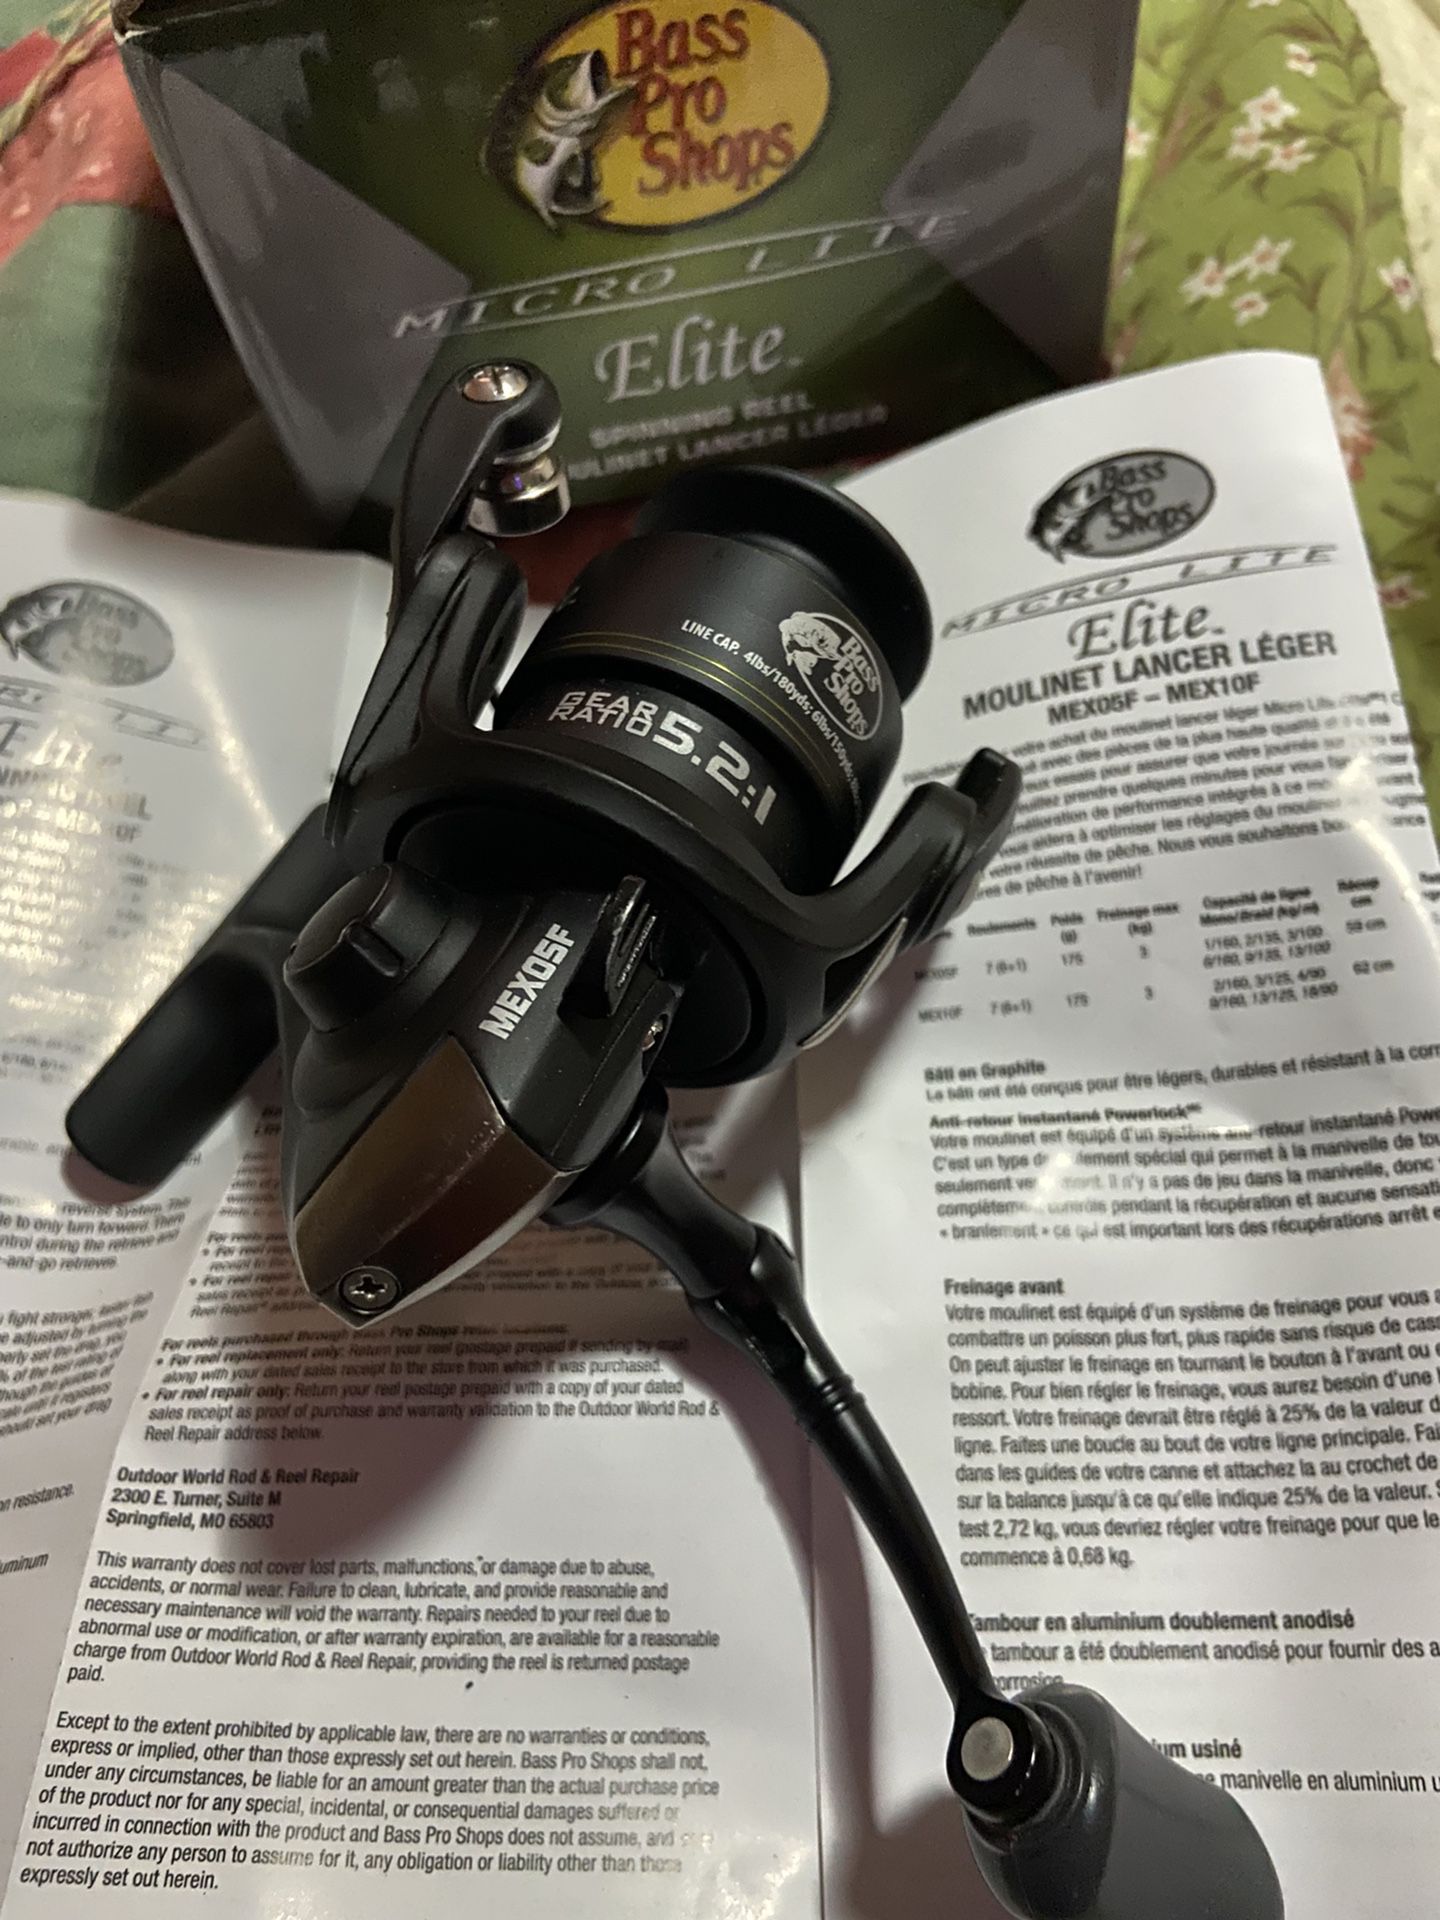 Bass pro shops Micro Lite Elite Fishing Reel for Sale in Payson